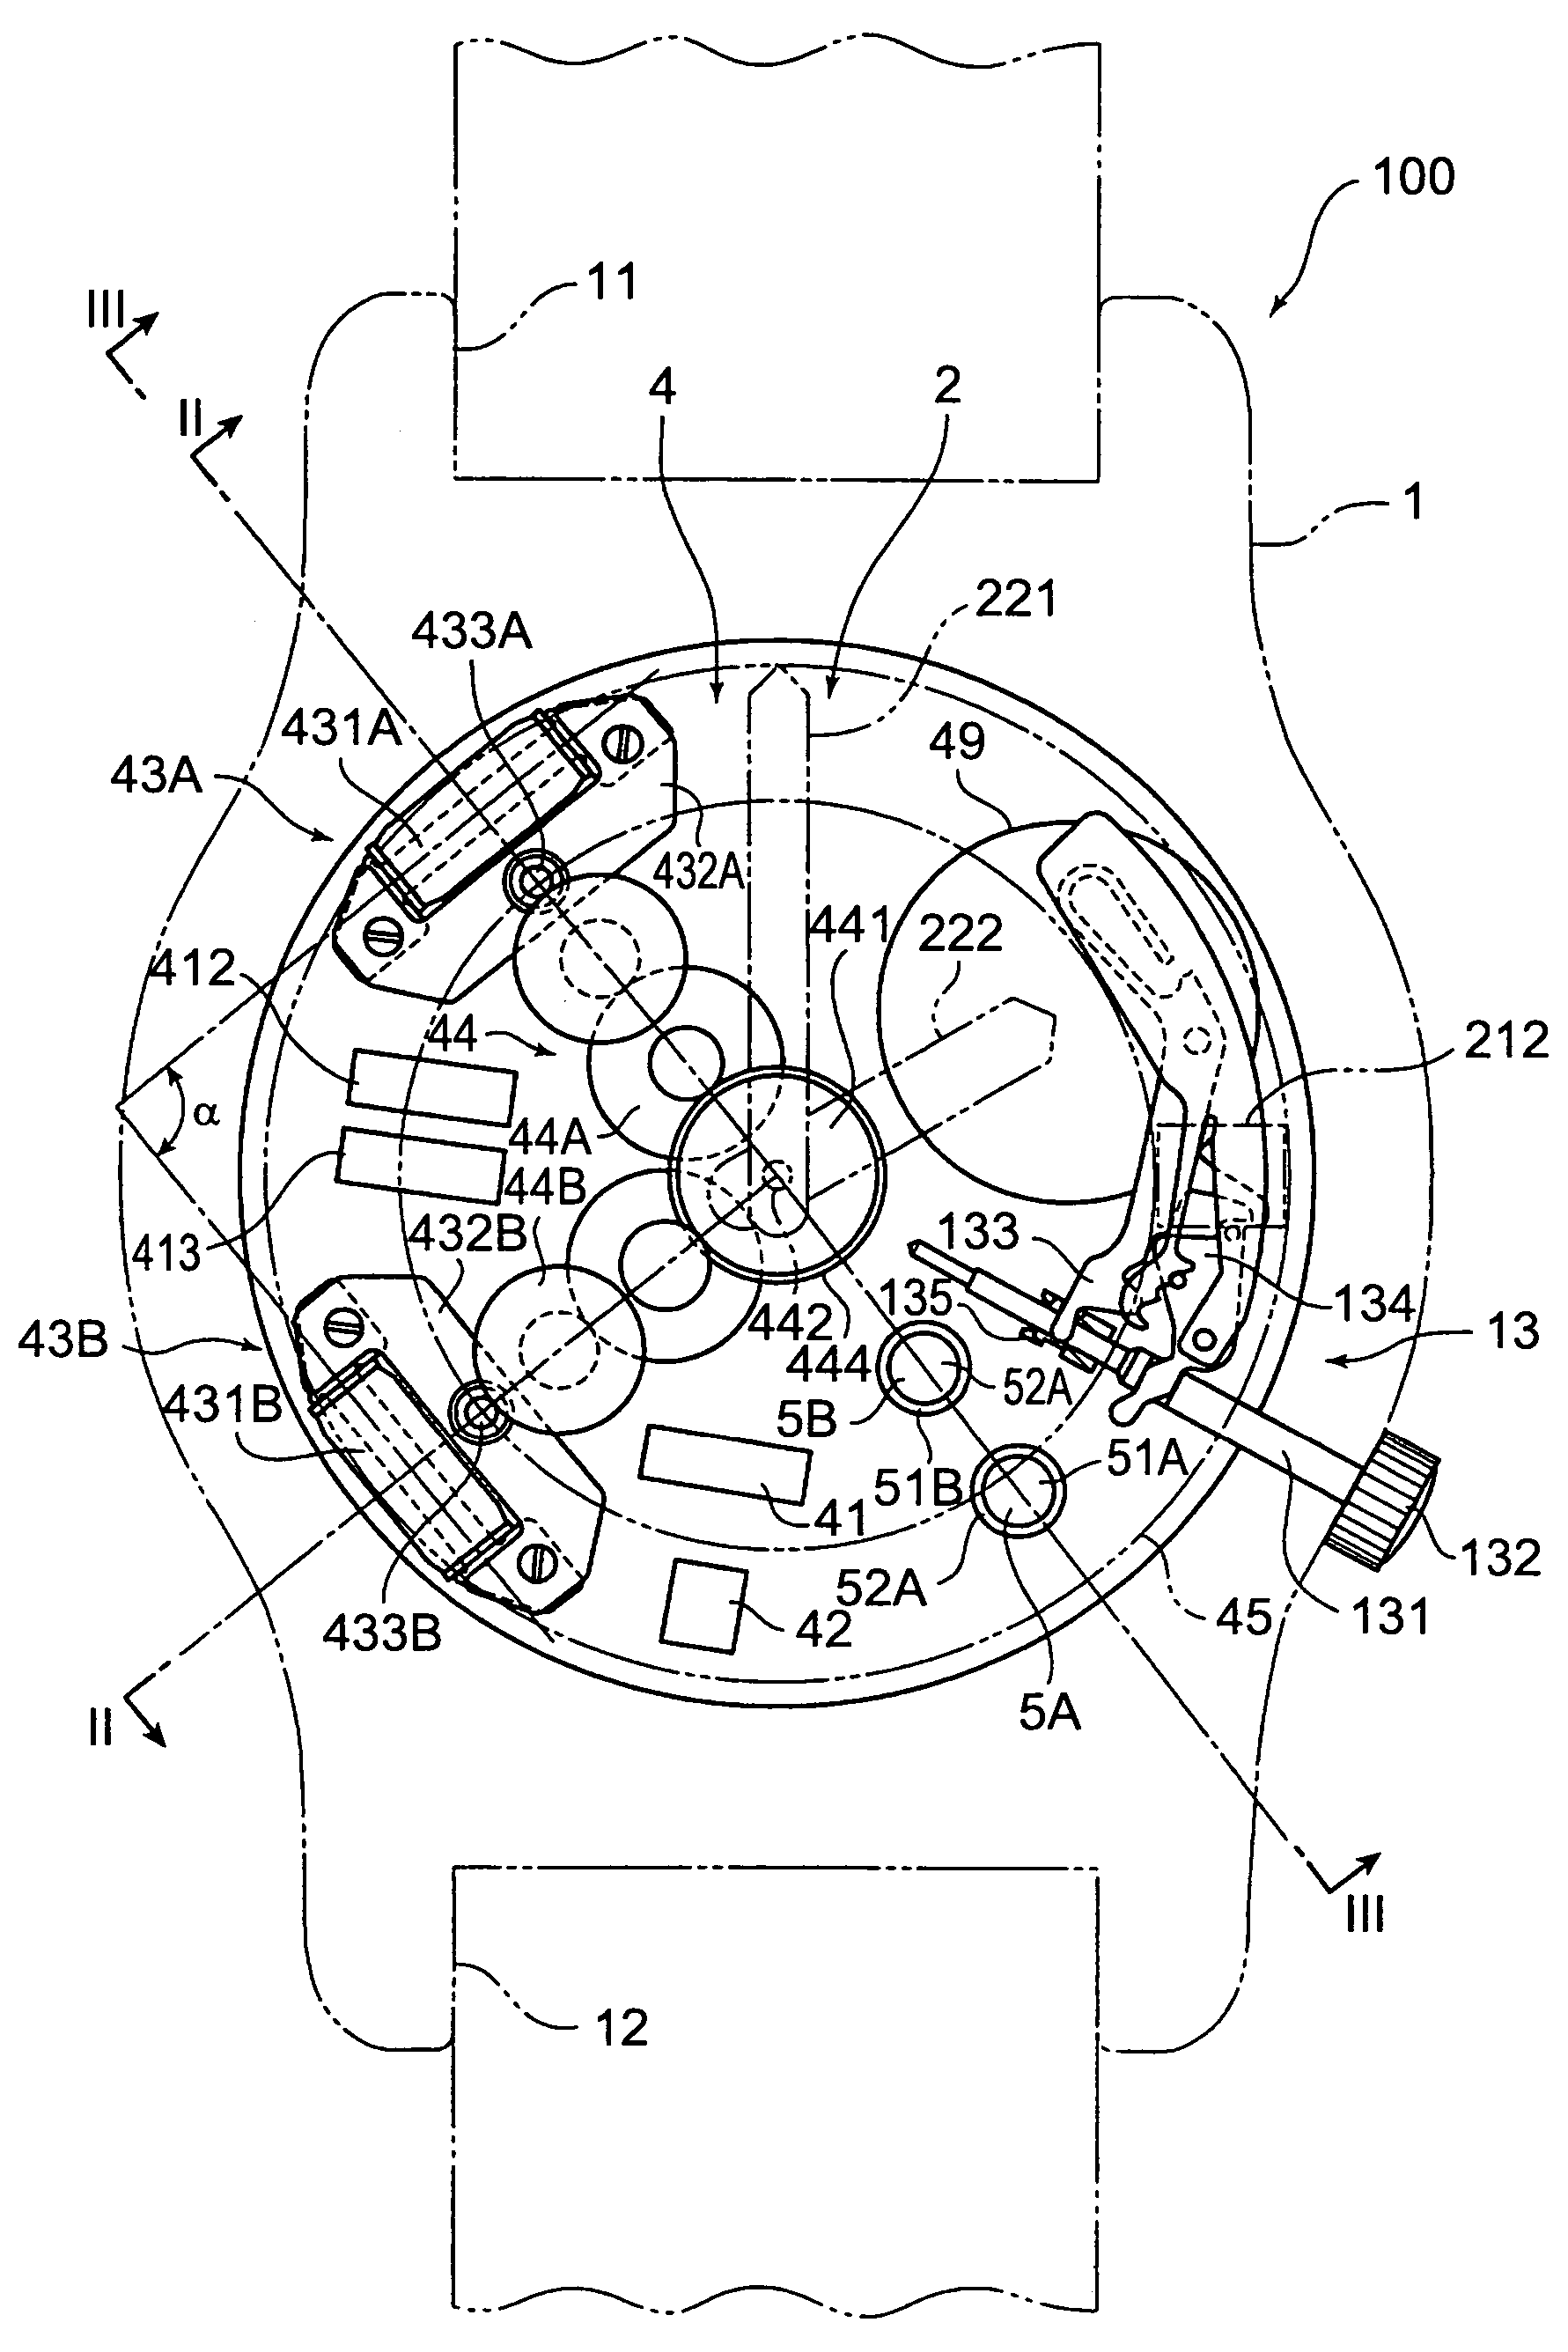 Electronic timepiece with wireless information function